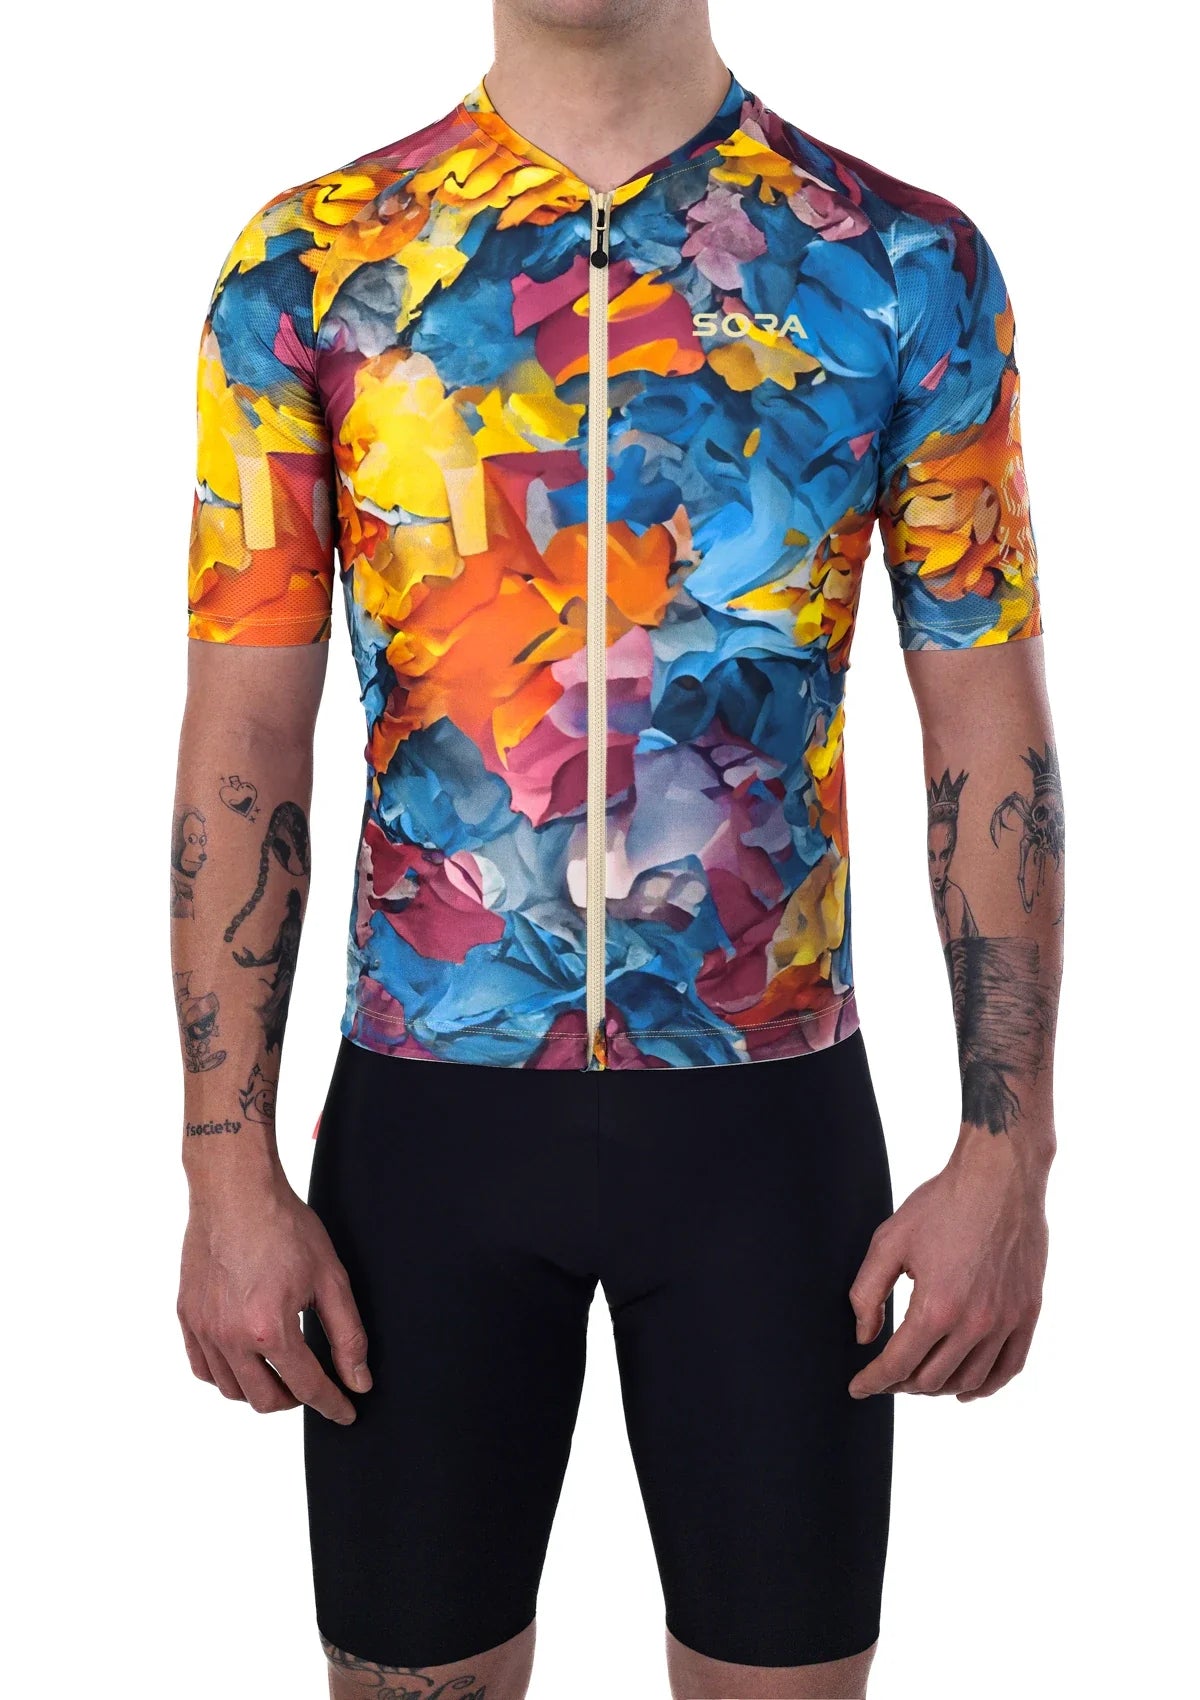 Classic cycling jersey flare